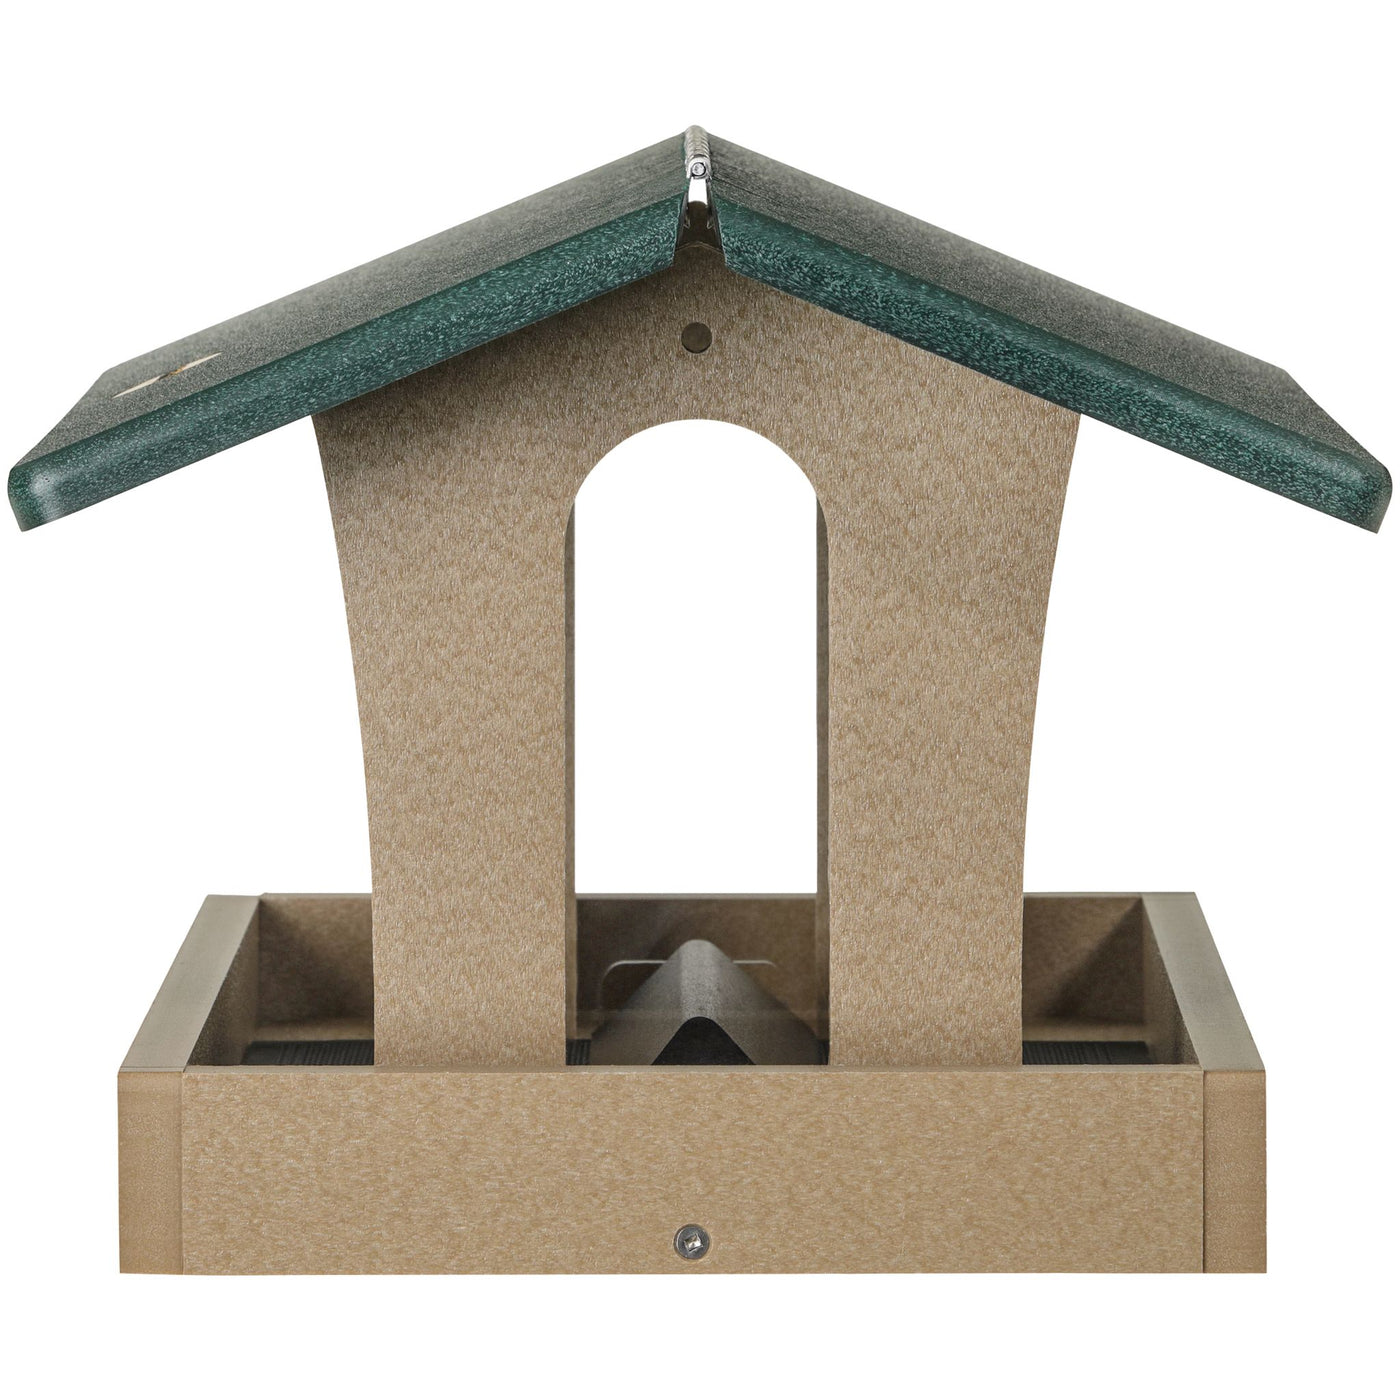 Medium 4 Sided Hopper Bird Feeder in Taupe and Green Recycled Plastic